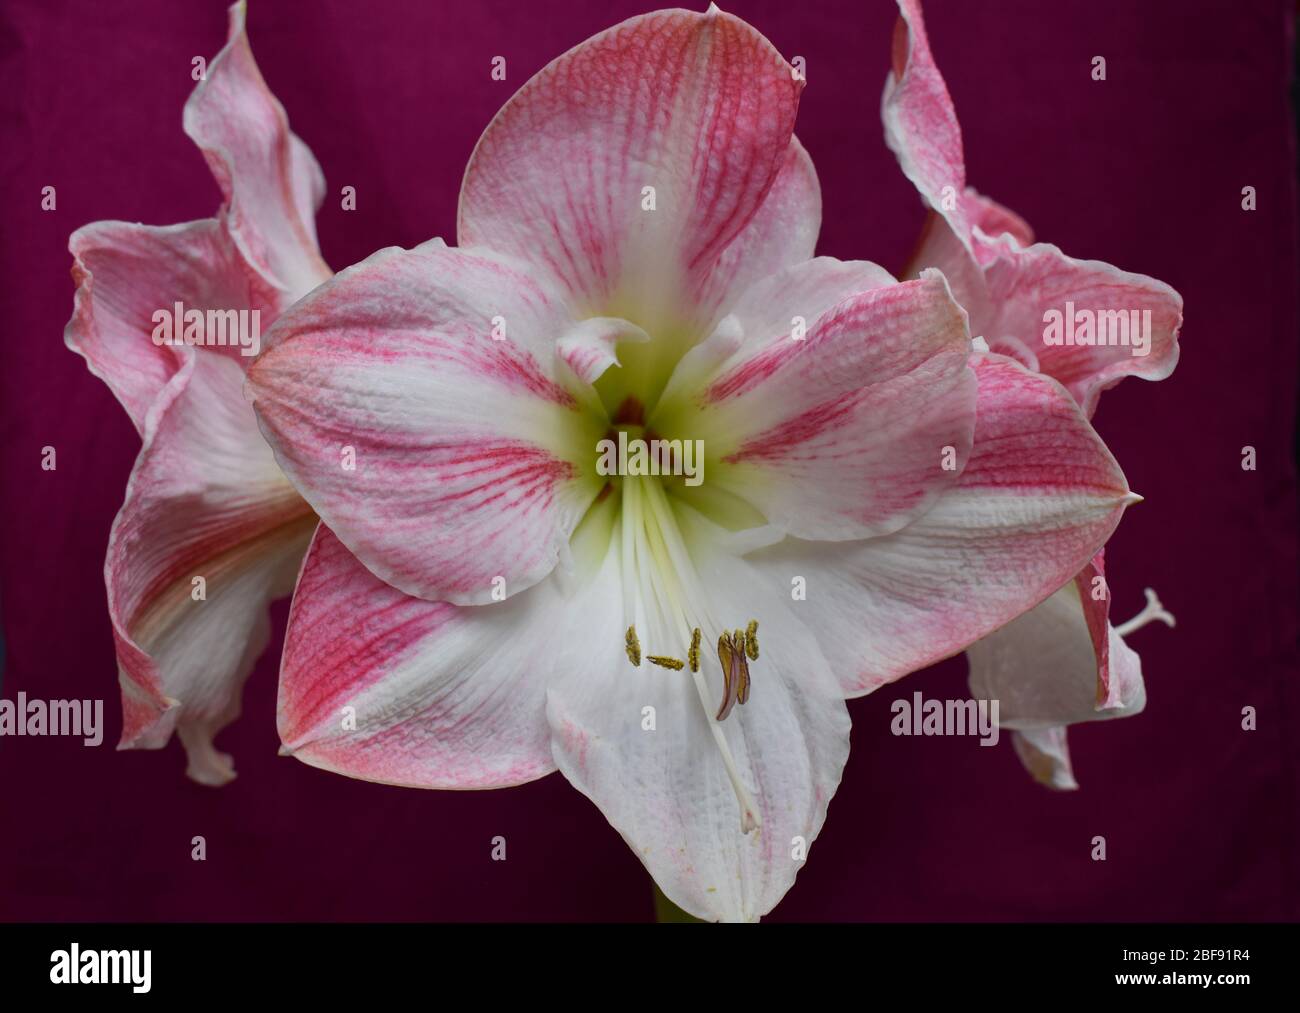 Striped Barbados lily. Amaryllis blooms are huge trumpet shaped clustered atop leafless stem Sold during winter holidays both as cut flowers and bulbs Stock Photo